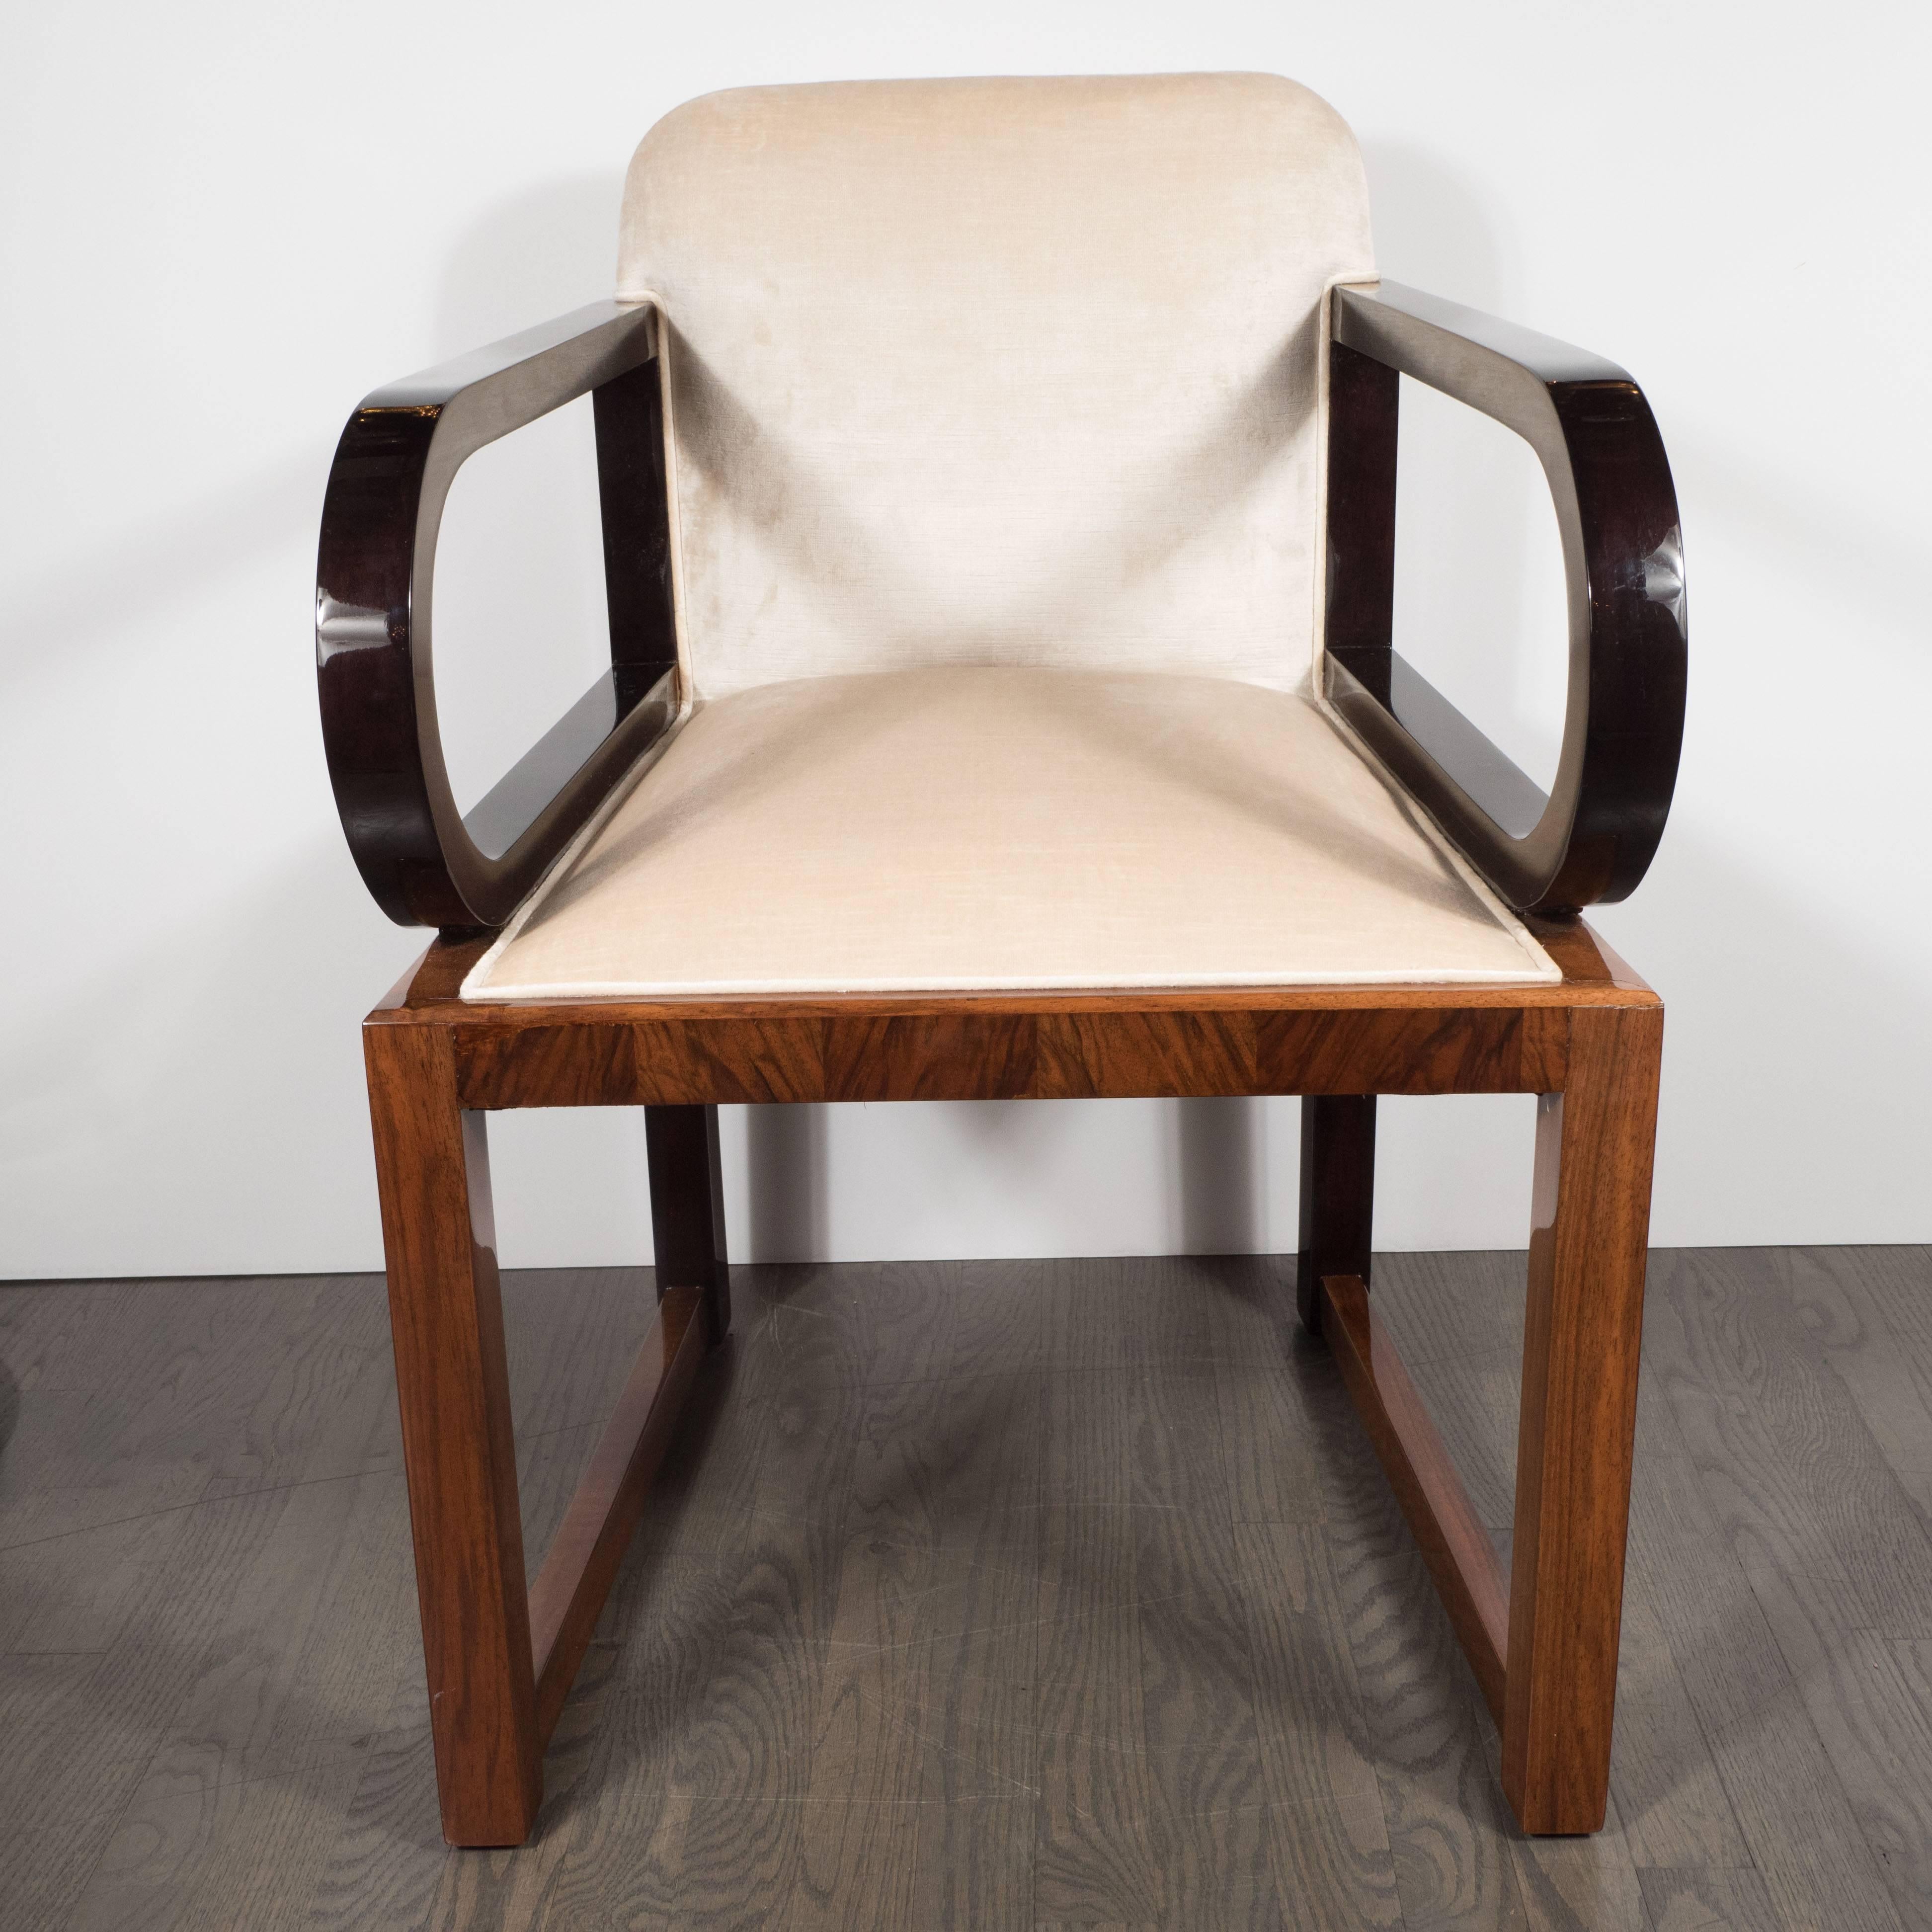 This gorgeous American Art Deco chair features streamlined arms in ebonized walnut, a material repeated on the stiles. The sable tones of the ebonized walnut offers a striking tonal contrast to the straight rectangular legs (as well as the apron) of